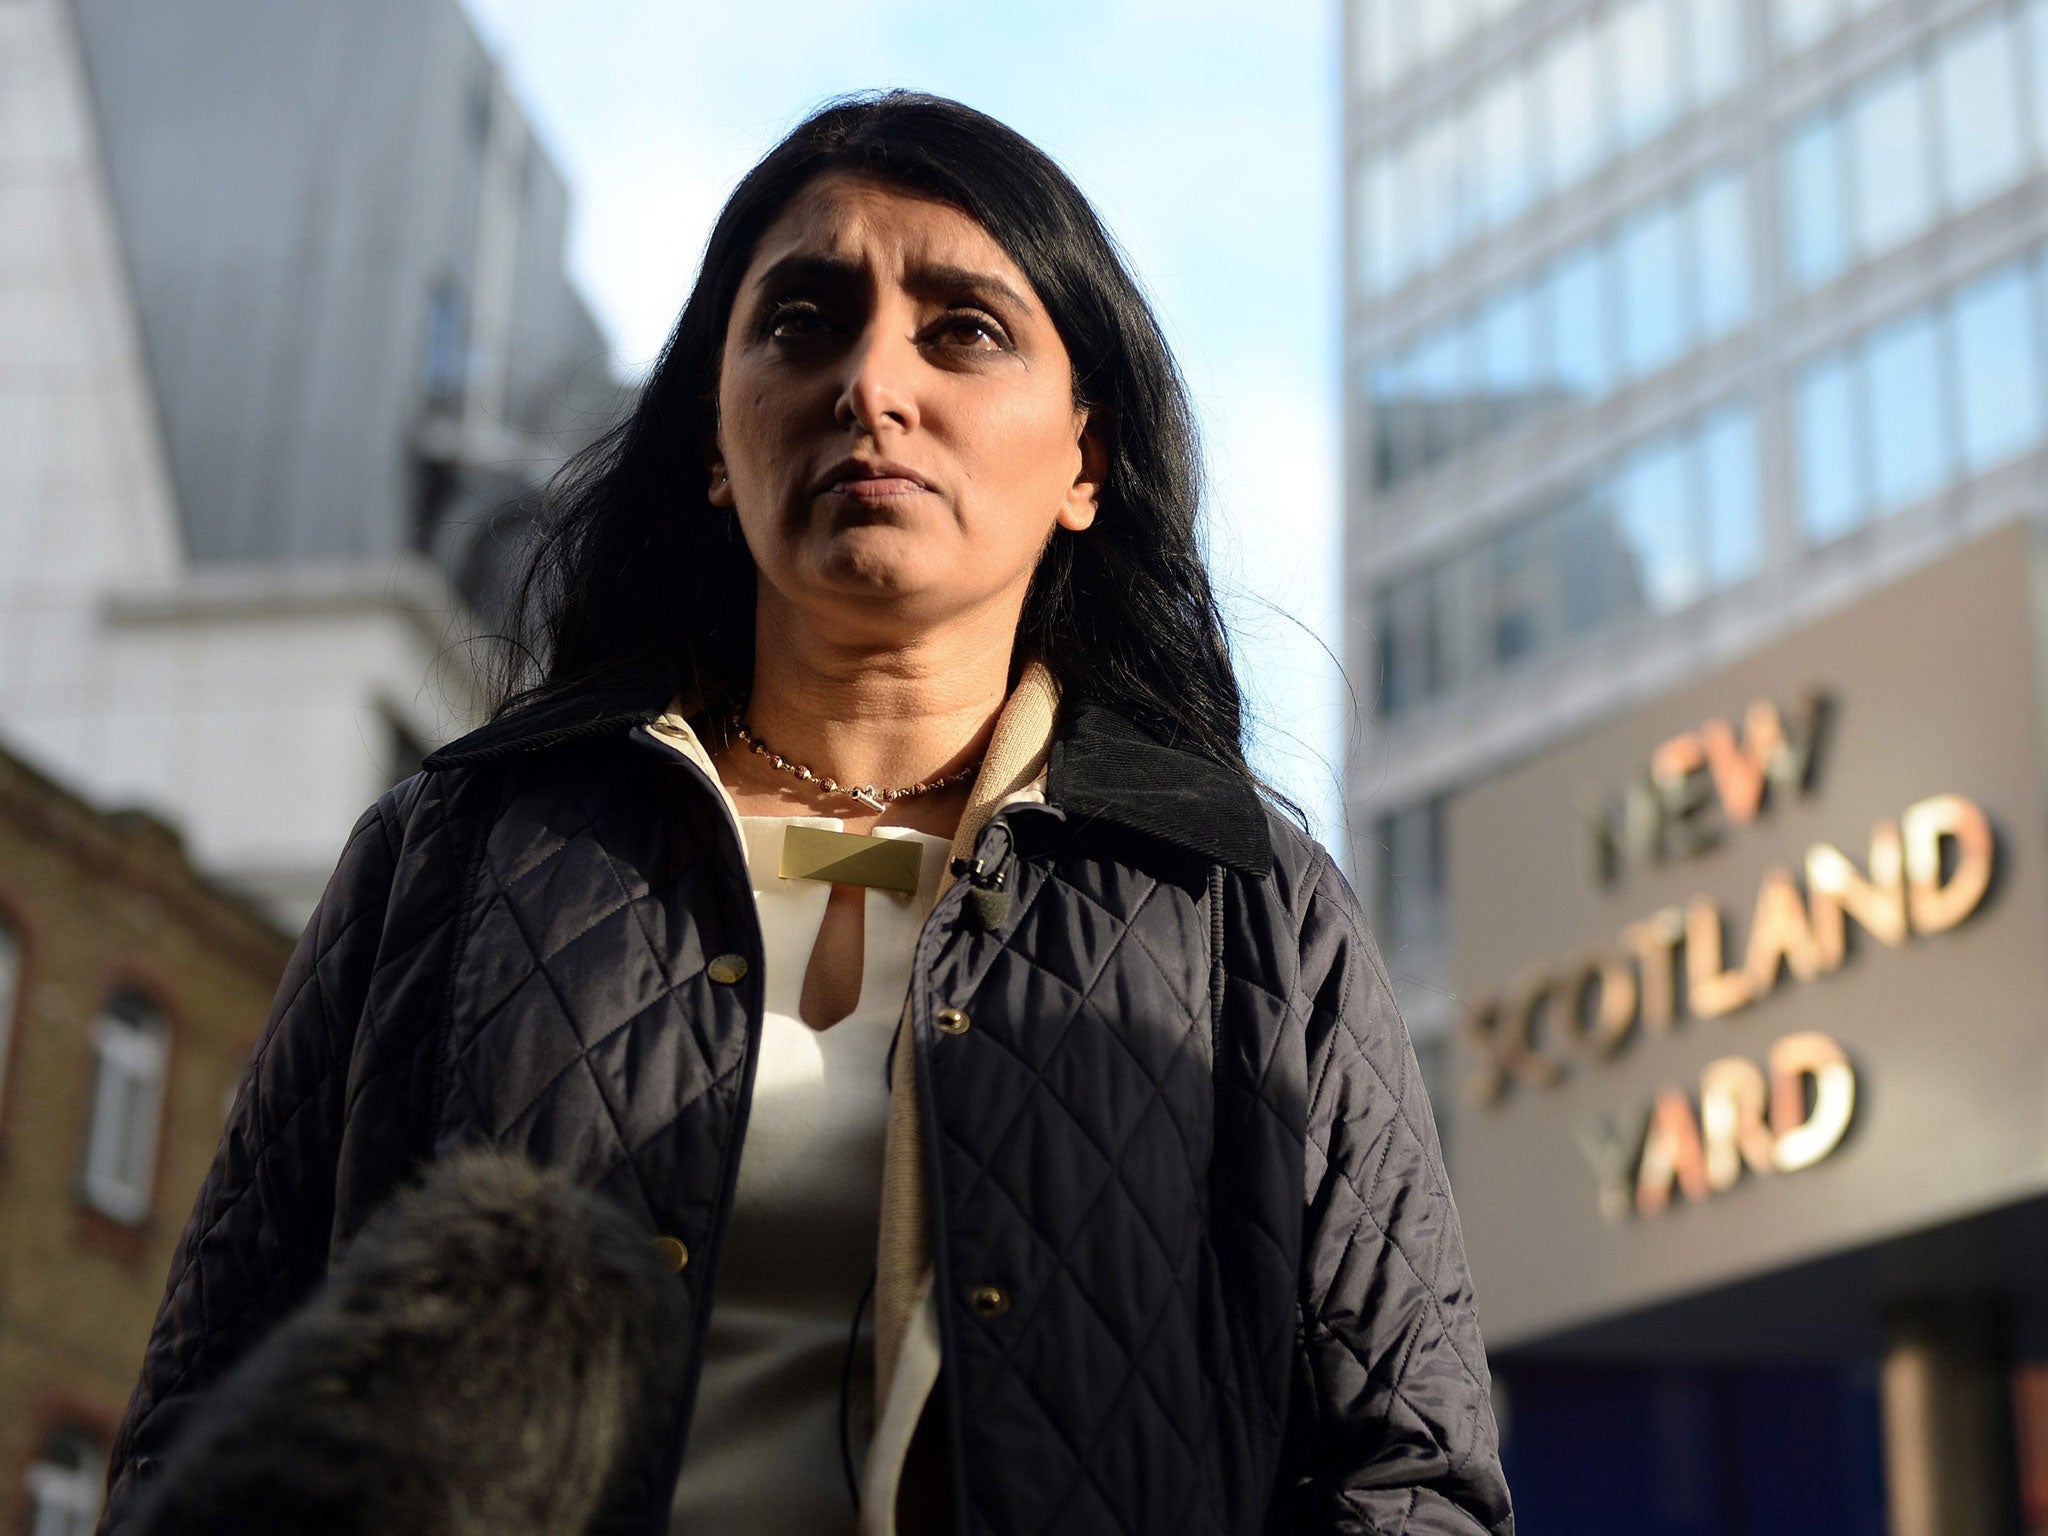 Aneeta Prem received a call from one of the women and tipped off Scotland Yard